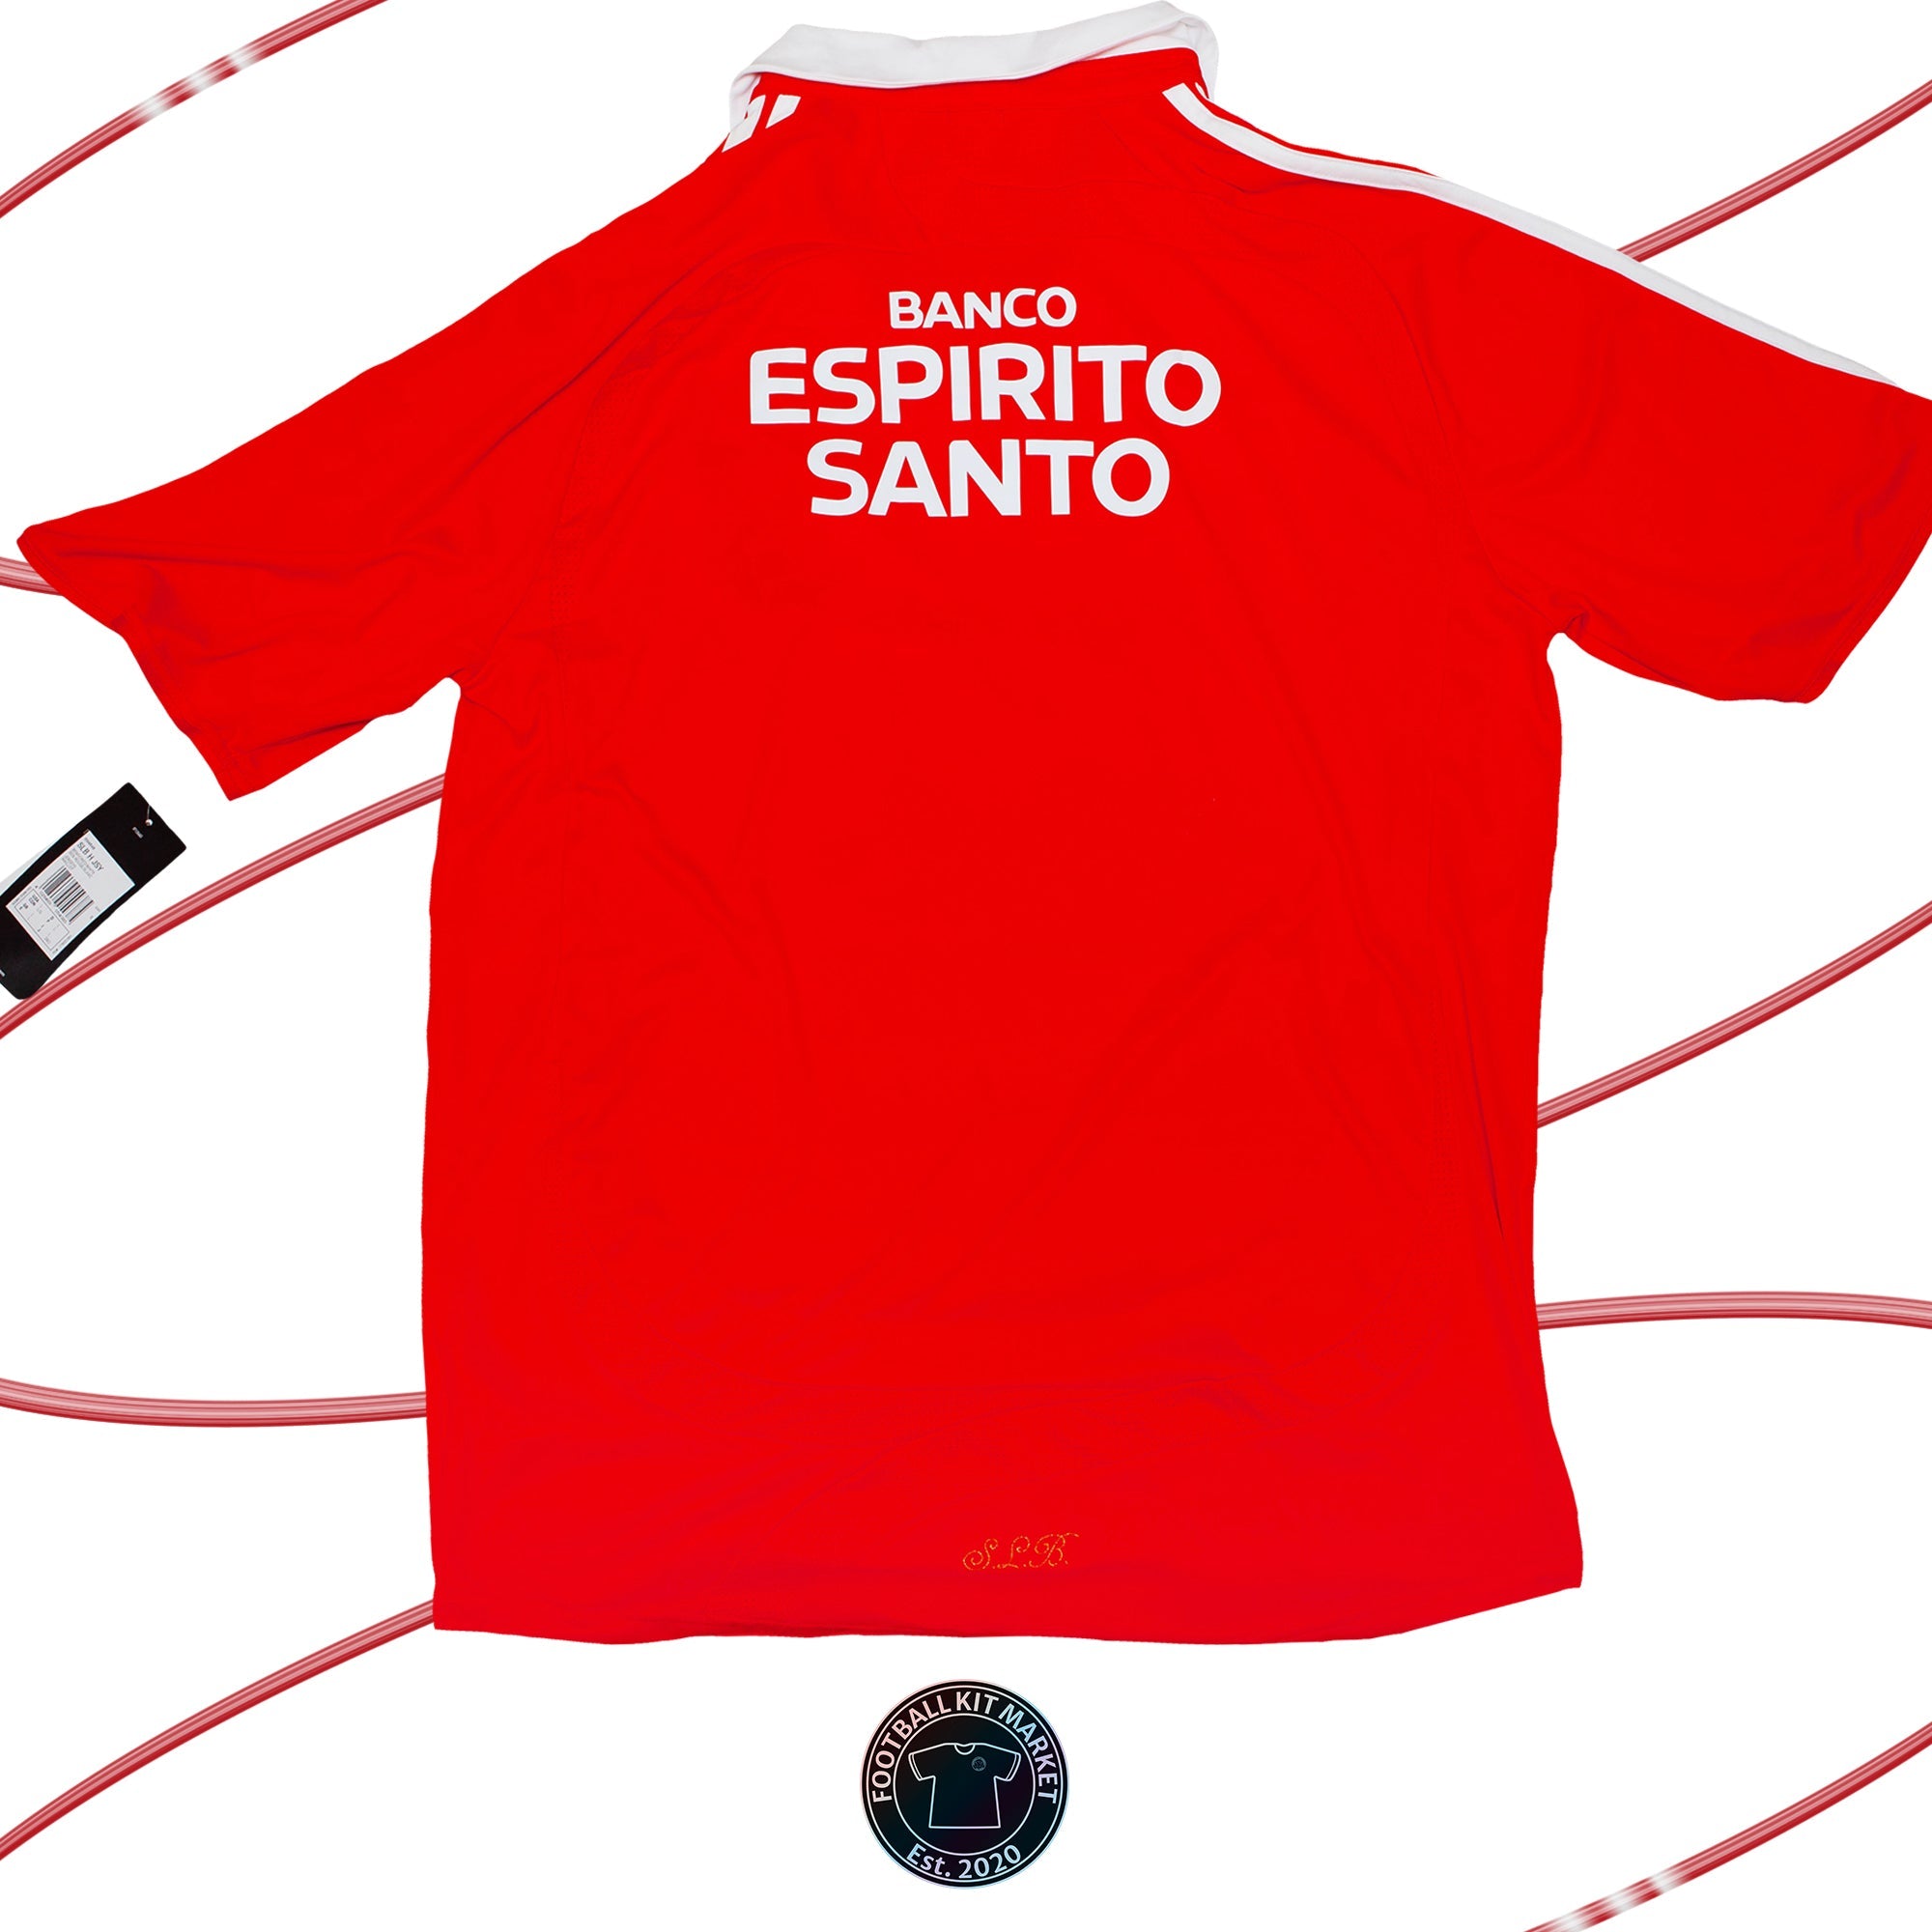 Genuine BENFICA Home (2007-2008) - ADIDAS (L) - Product Image from Football Kit Market